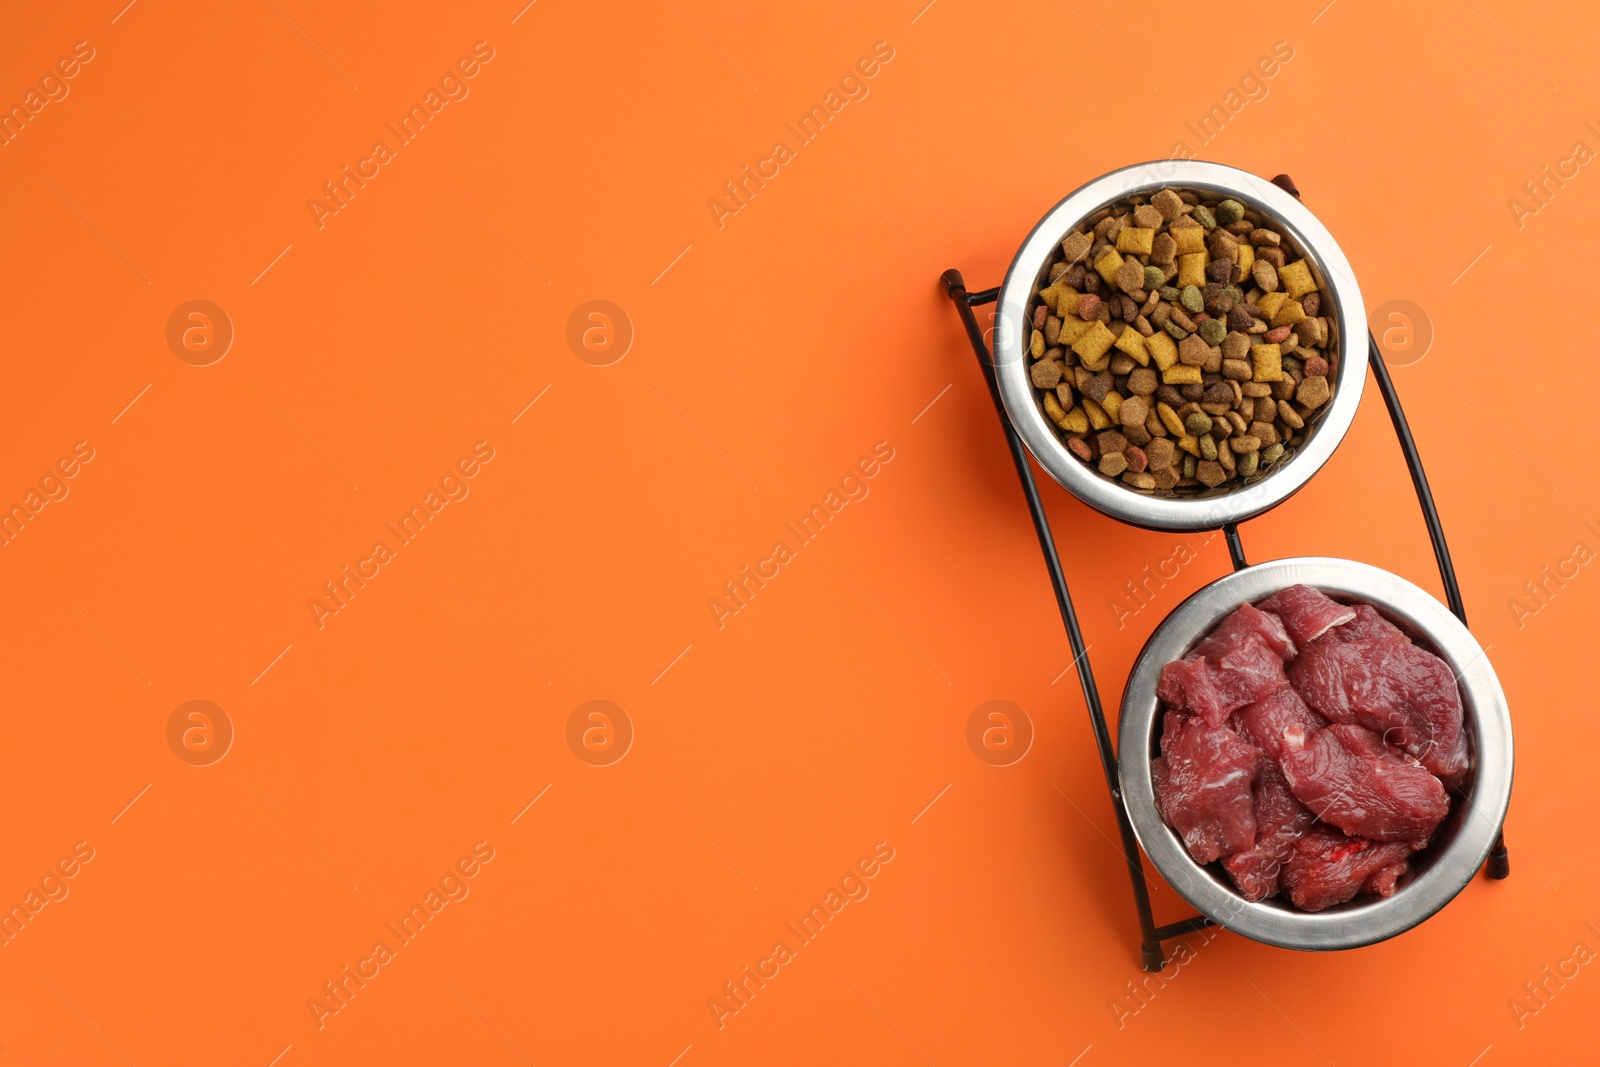 Photo of Pet food and raw meat on orange background, top view. Space for text